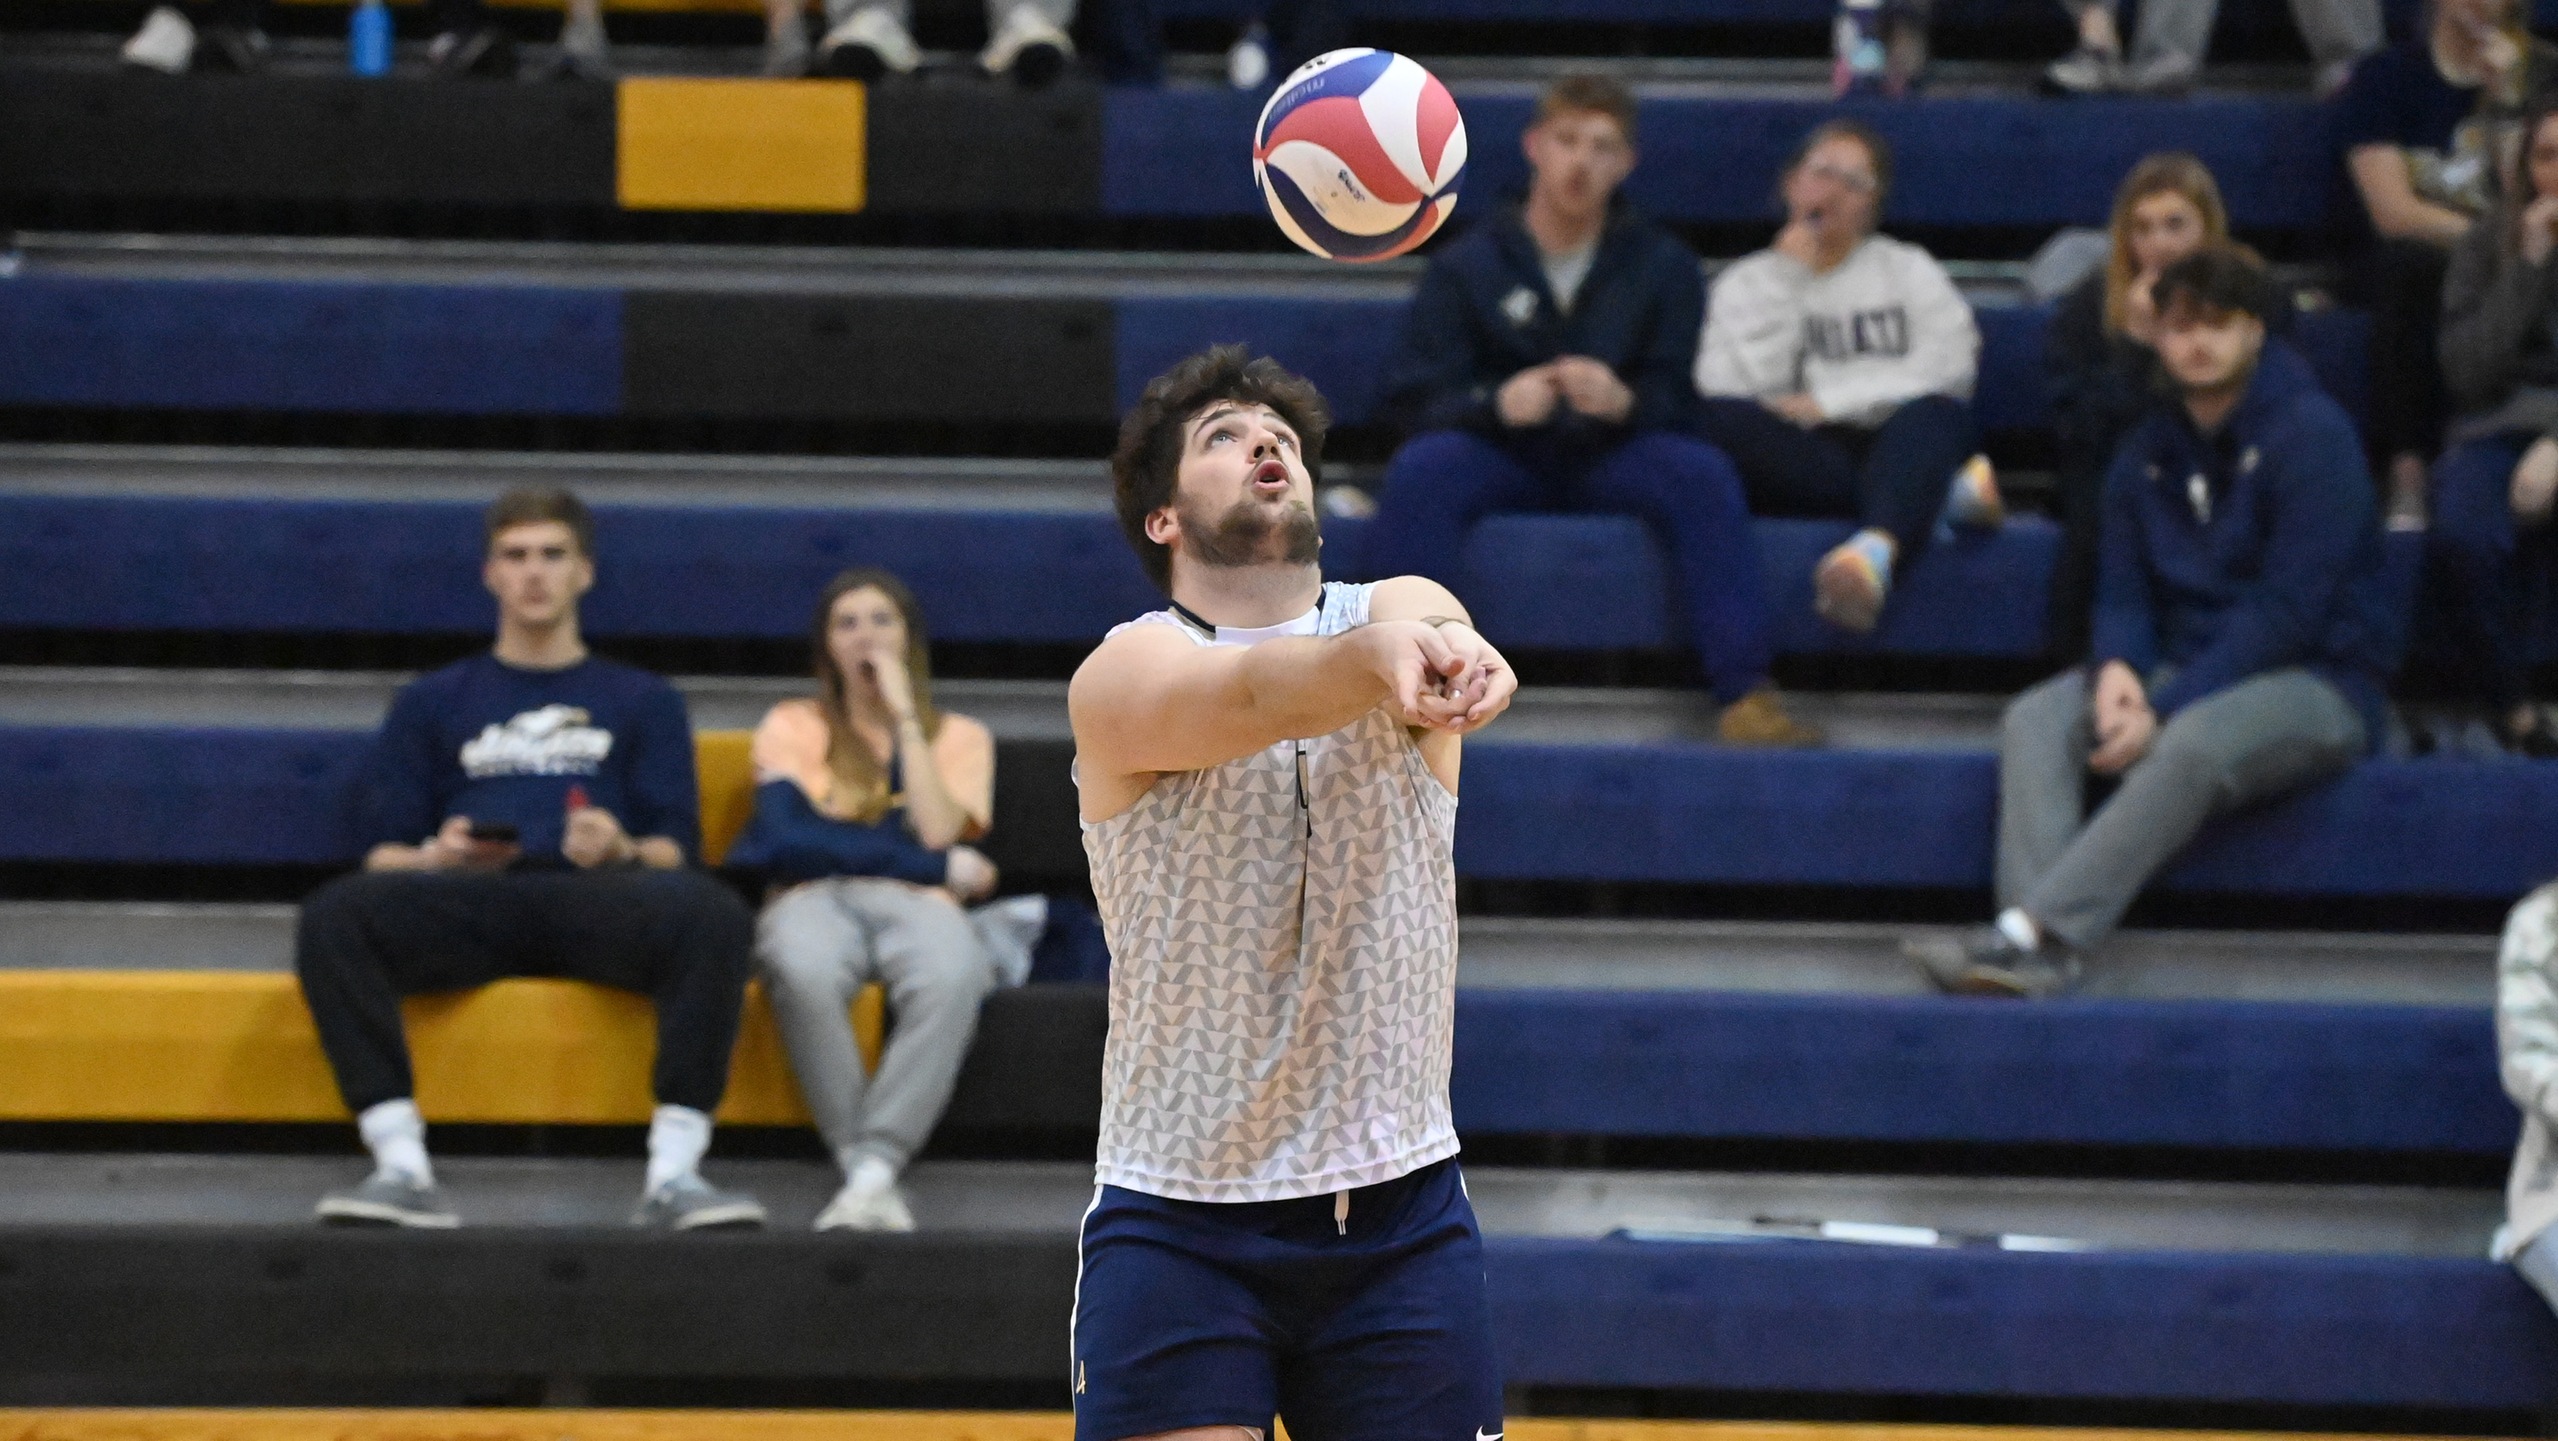 Eagles Sweep Blue Jays in CVC Action